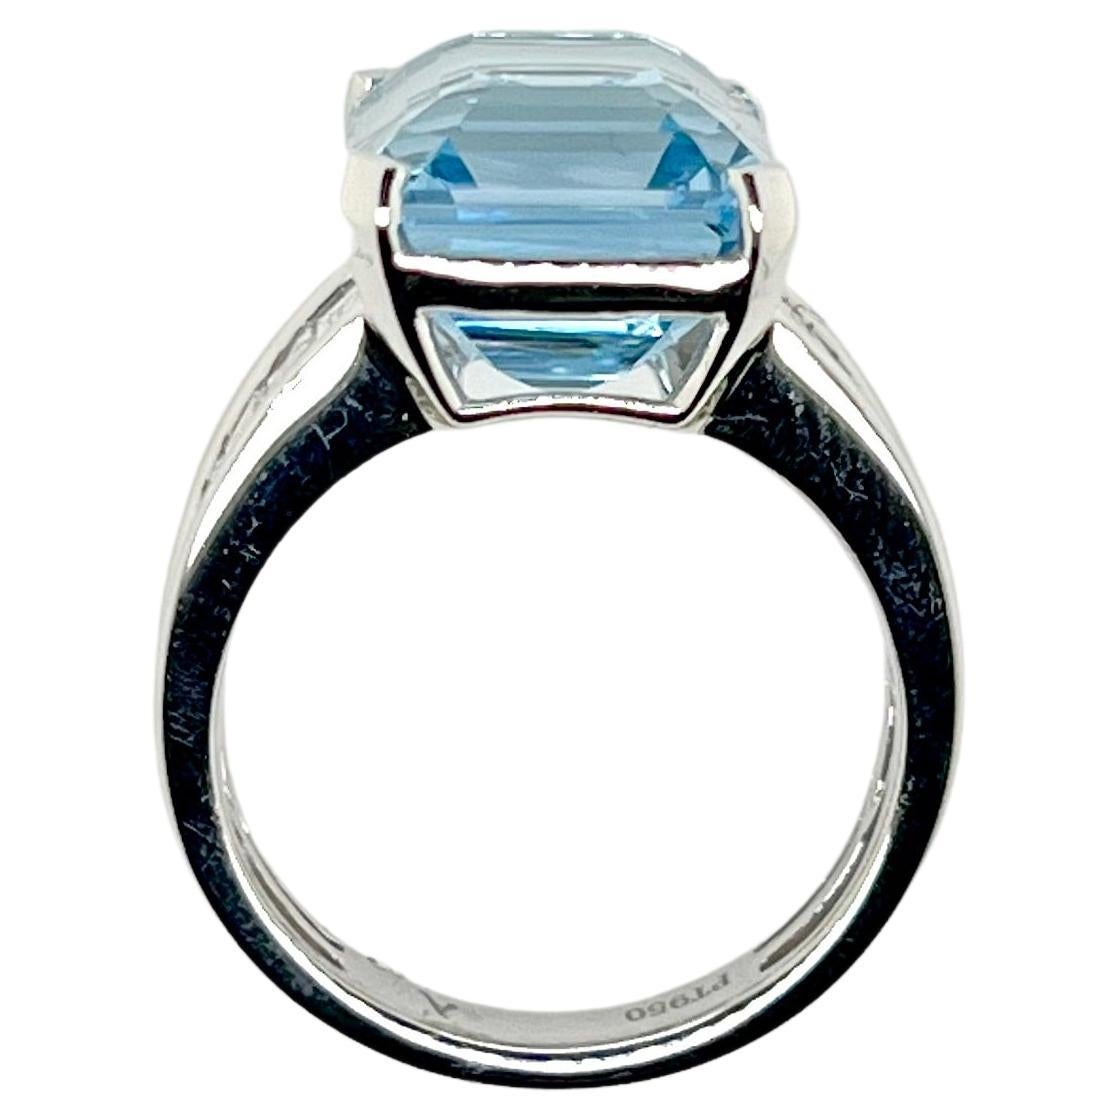 A stunning ocean blue aquamarine ring set in an iconic baguette diamond setting that is slightly tapered in a platinum handmade mounting.  The crisp, blue hue aquamarine weights a generous 9.55 carats while the specially selected baguettes come in